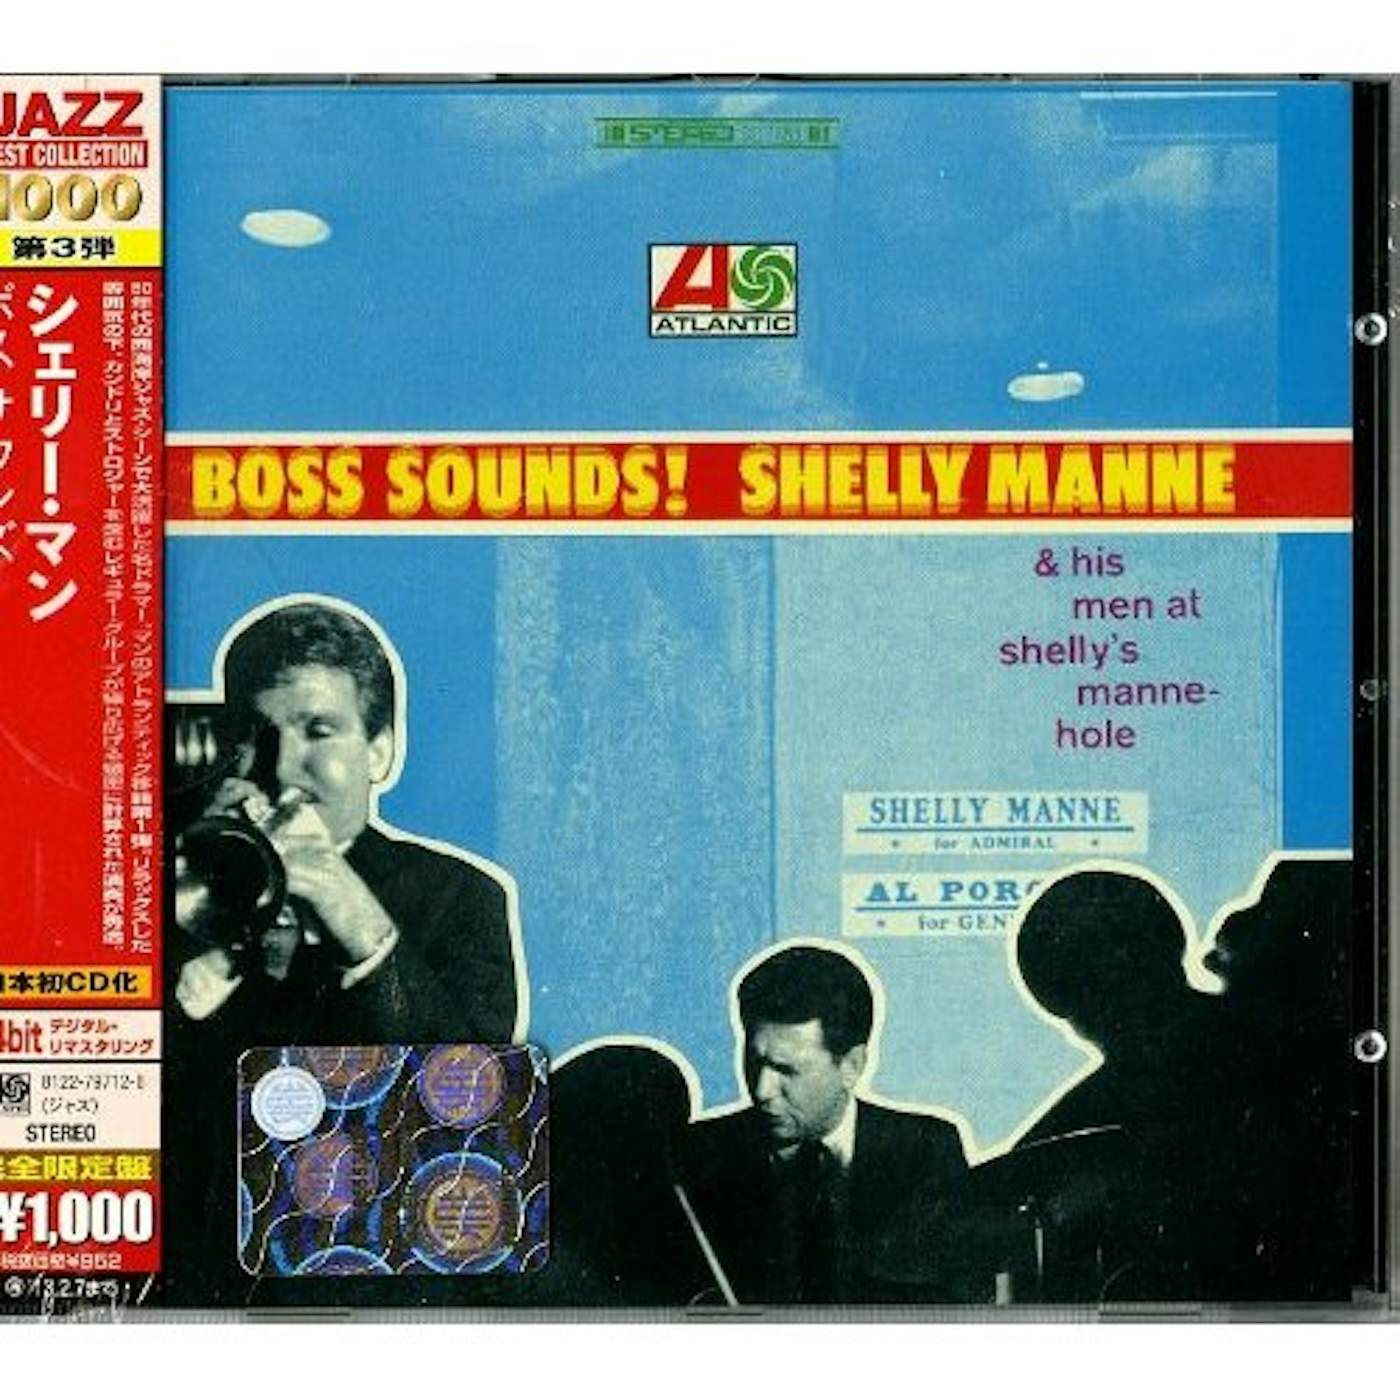 BOSS SOUNDS: SHELLY MANNE & HIS MEN AT SHELLY'S MA CD